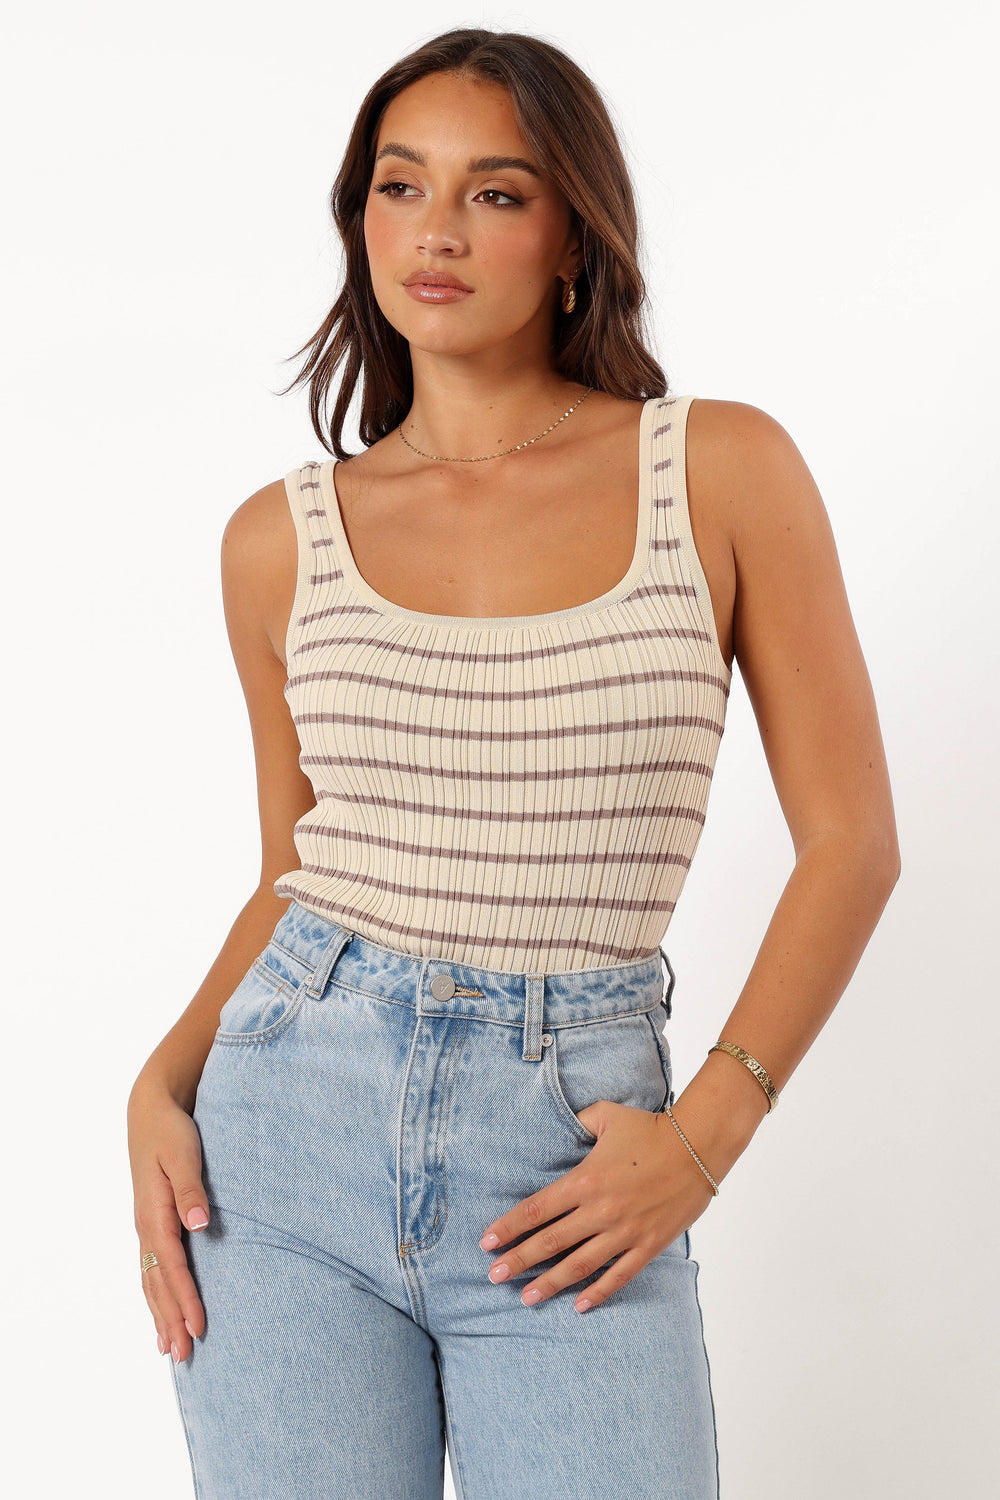 TOPS @Milla Knit Top - Cream Mocha (Hold for Cool Beginnings)